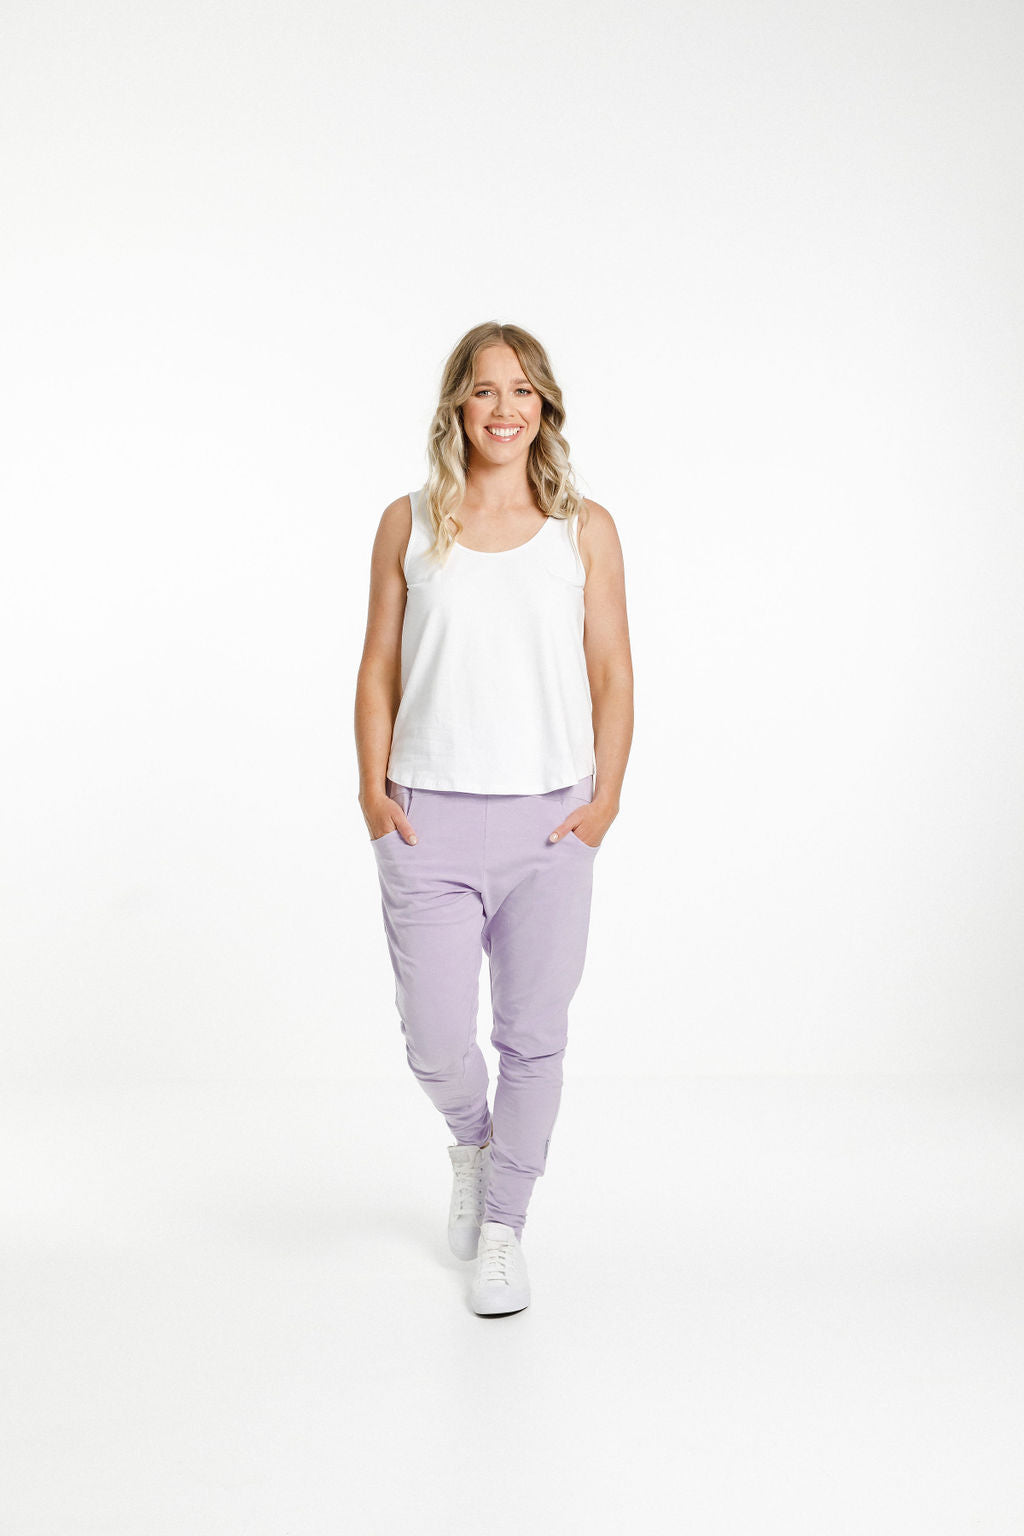 Home Lee Apartment Pants -Periwinkle with Stripe